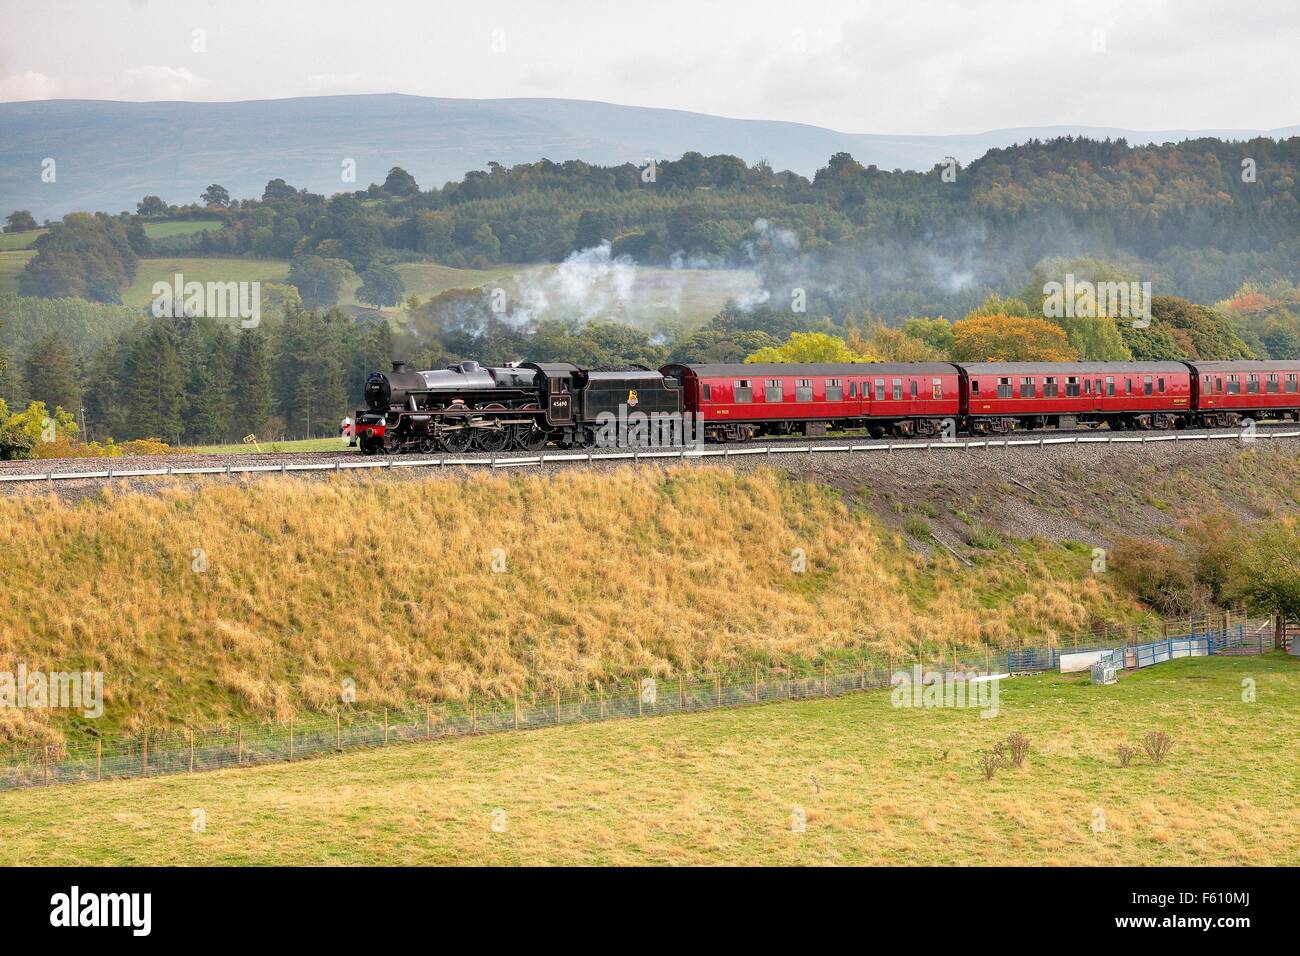 Steam locomotive LMS Jubilee Class Leander 45690 on the Settle to Carlisle Railway Line near Lazonby, Eden Valley, Cumbria, Engl Stock Photo